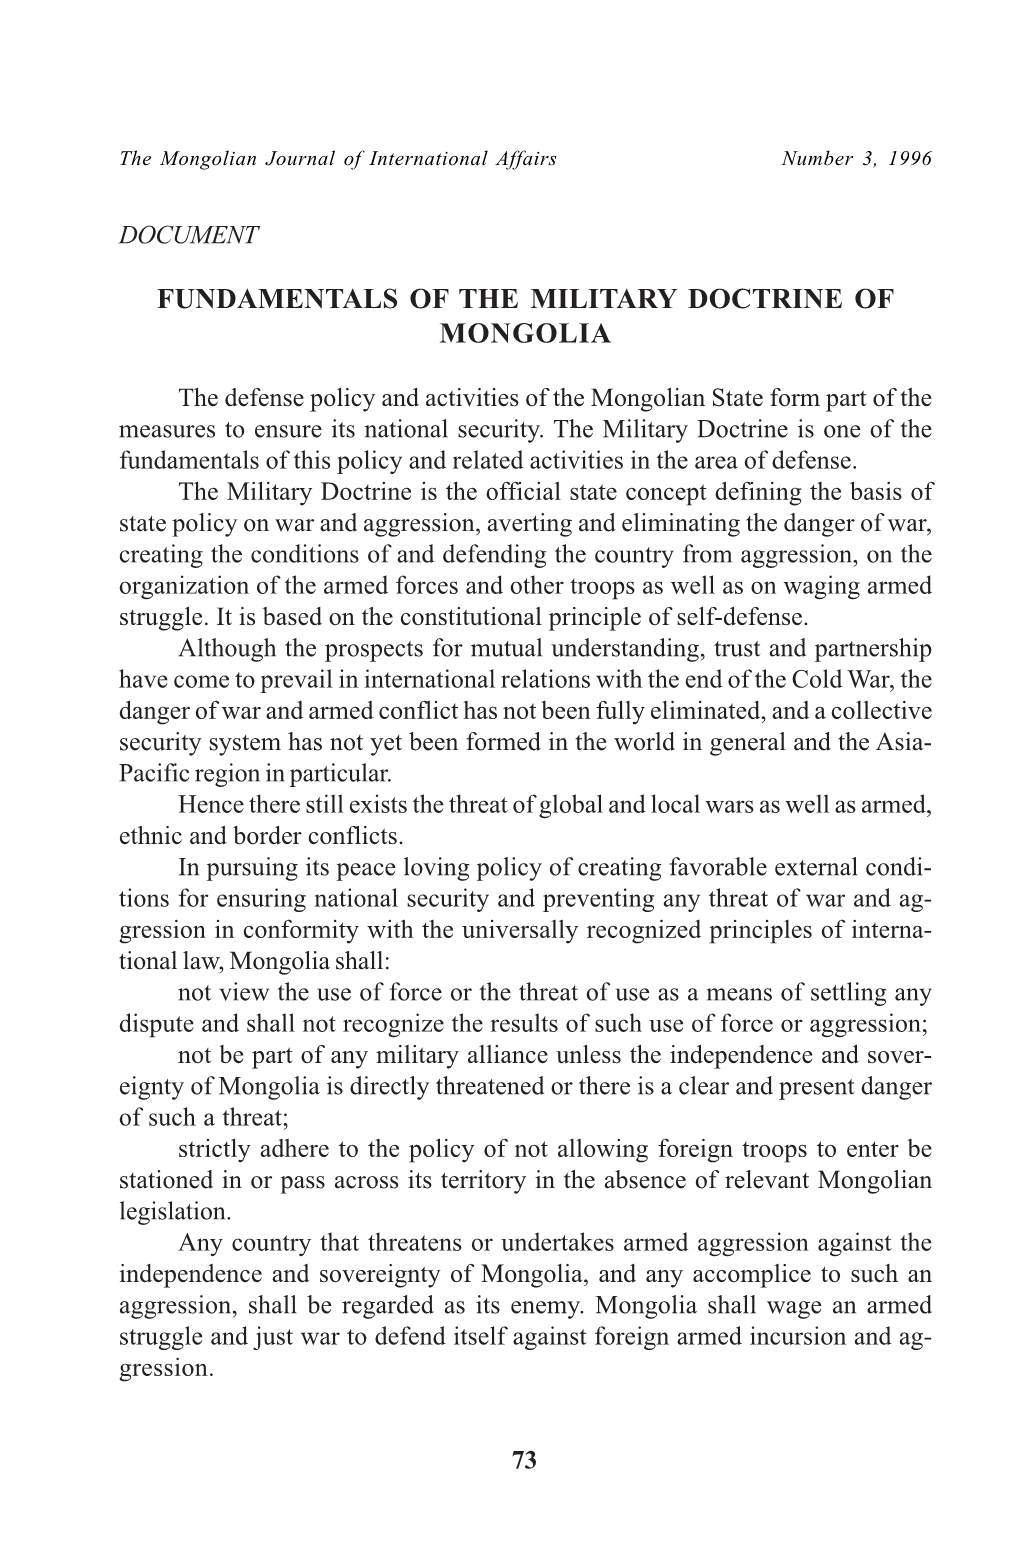 Fundamentals of the Military Doctrine of Mongolia